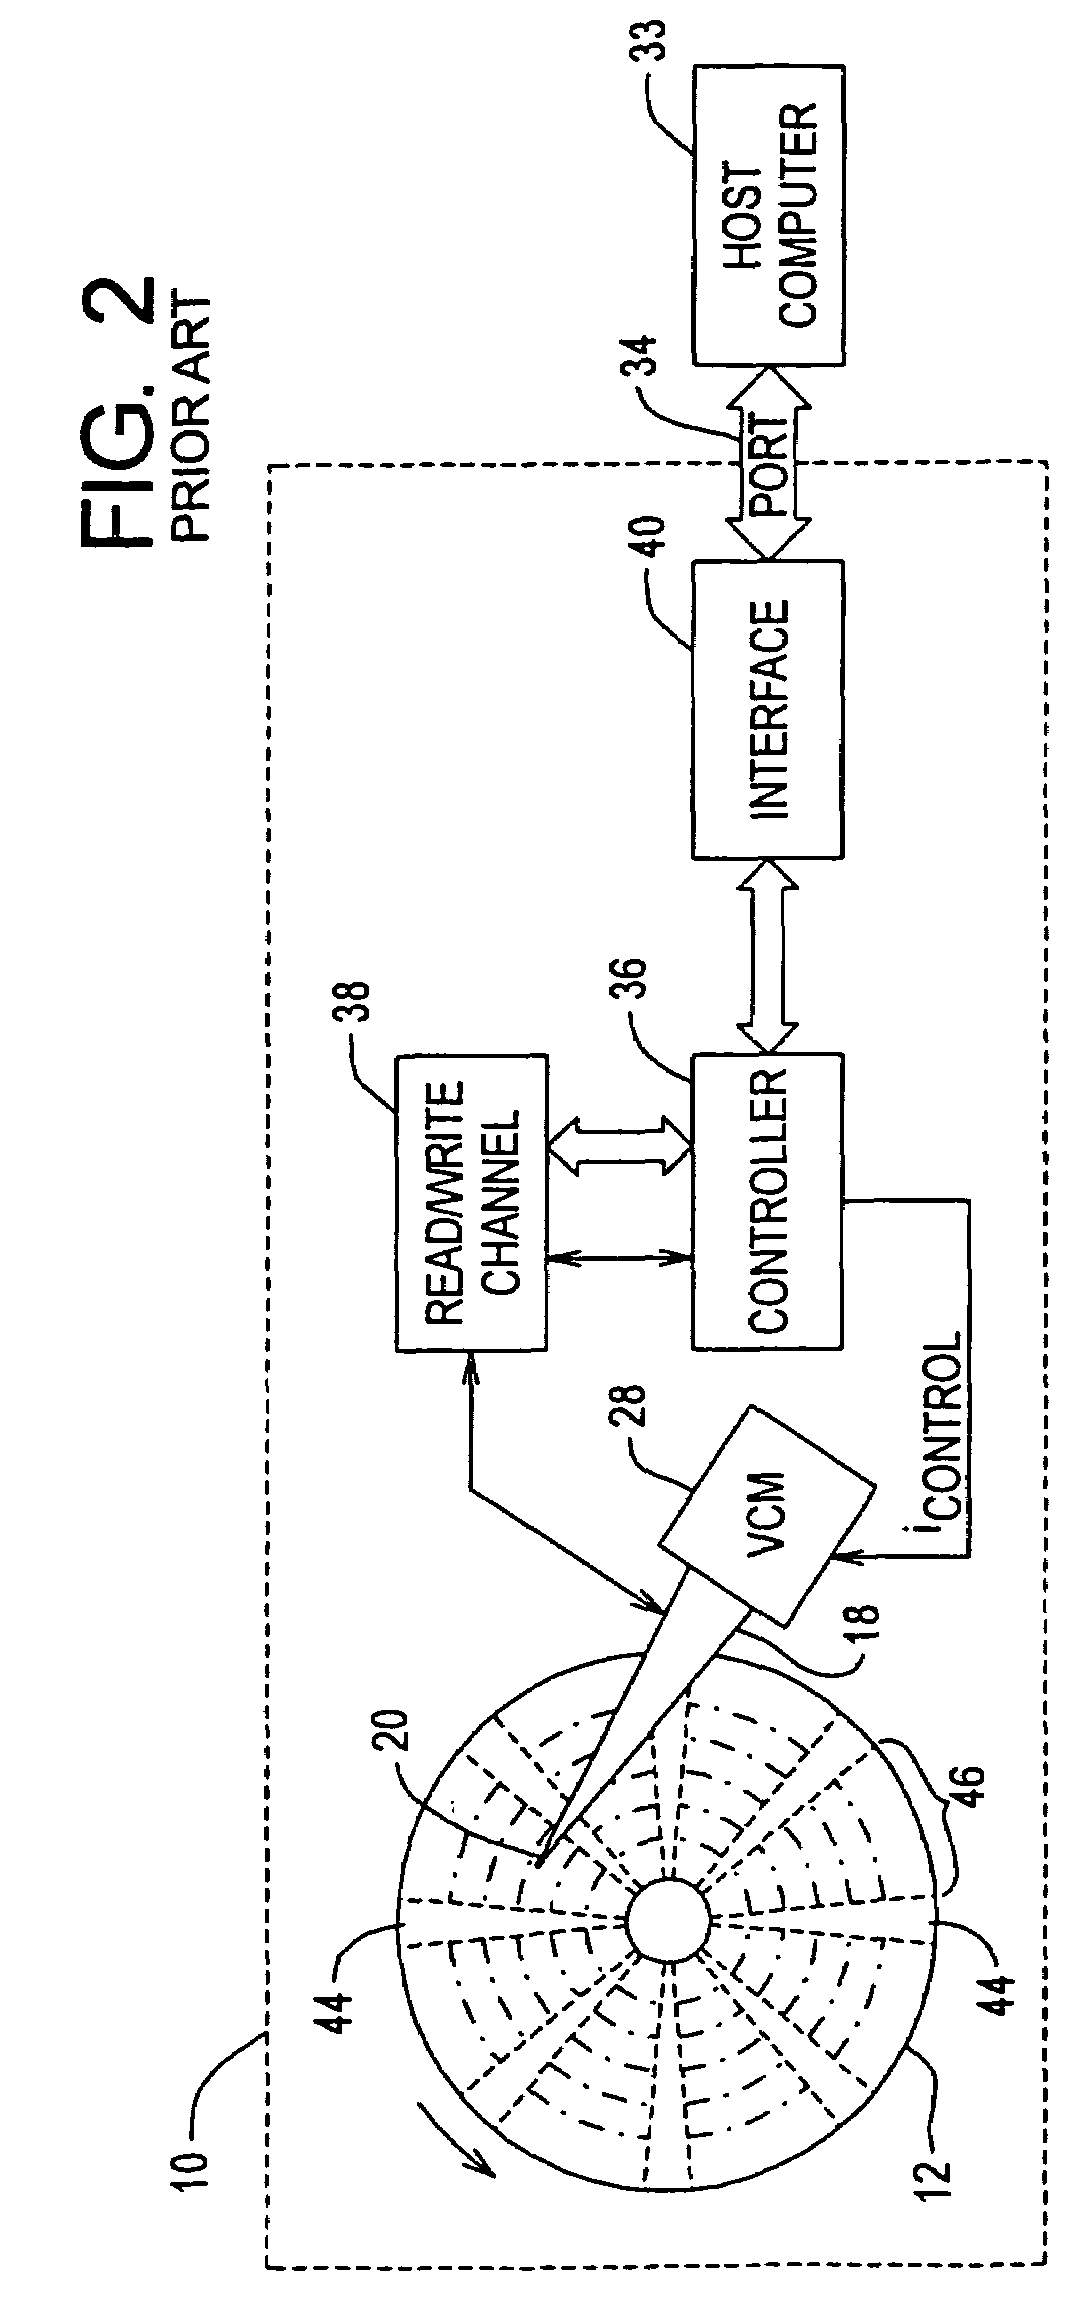 Method and apparatus for performing a self-servo write operation in a disk drive